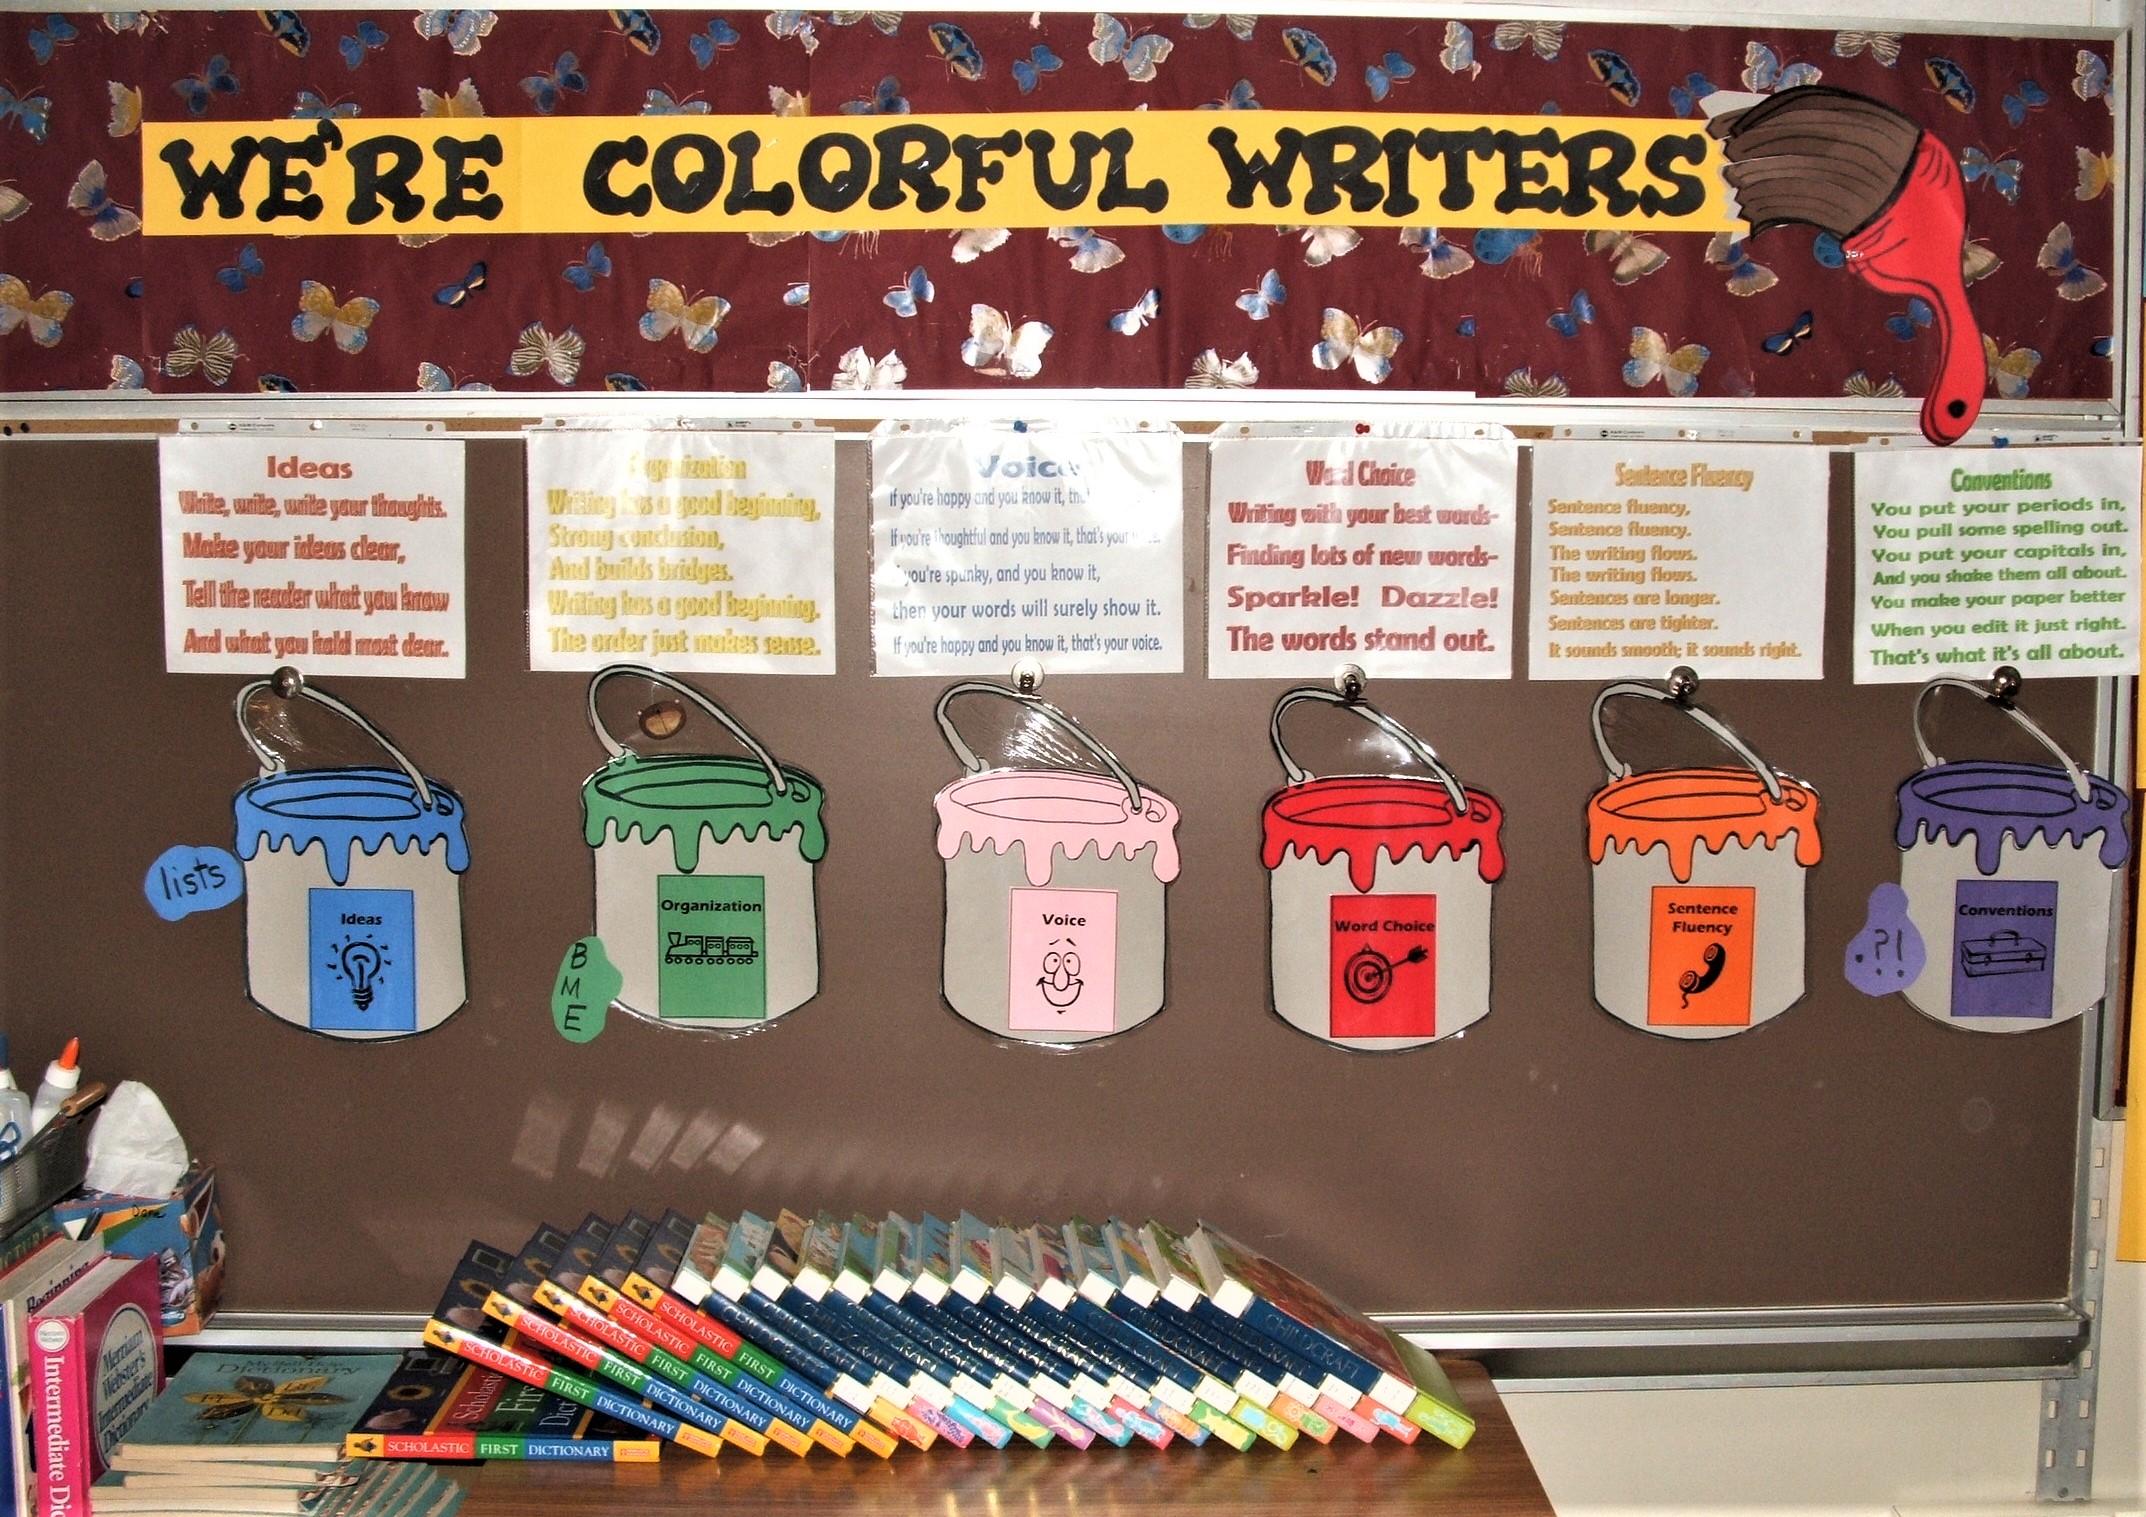 6-Traits Bulletin Board Display - We're colorful writers